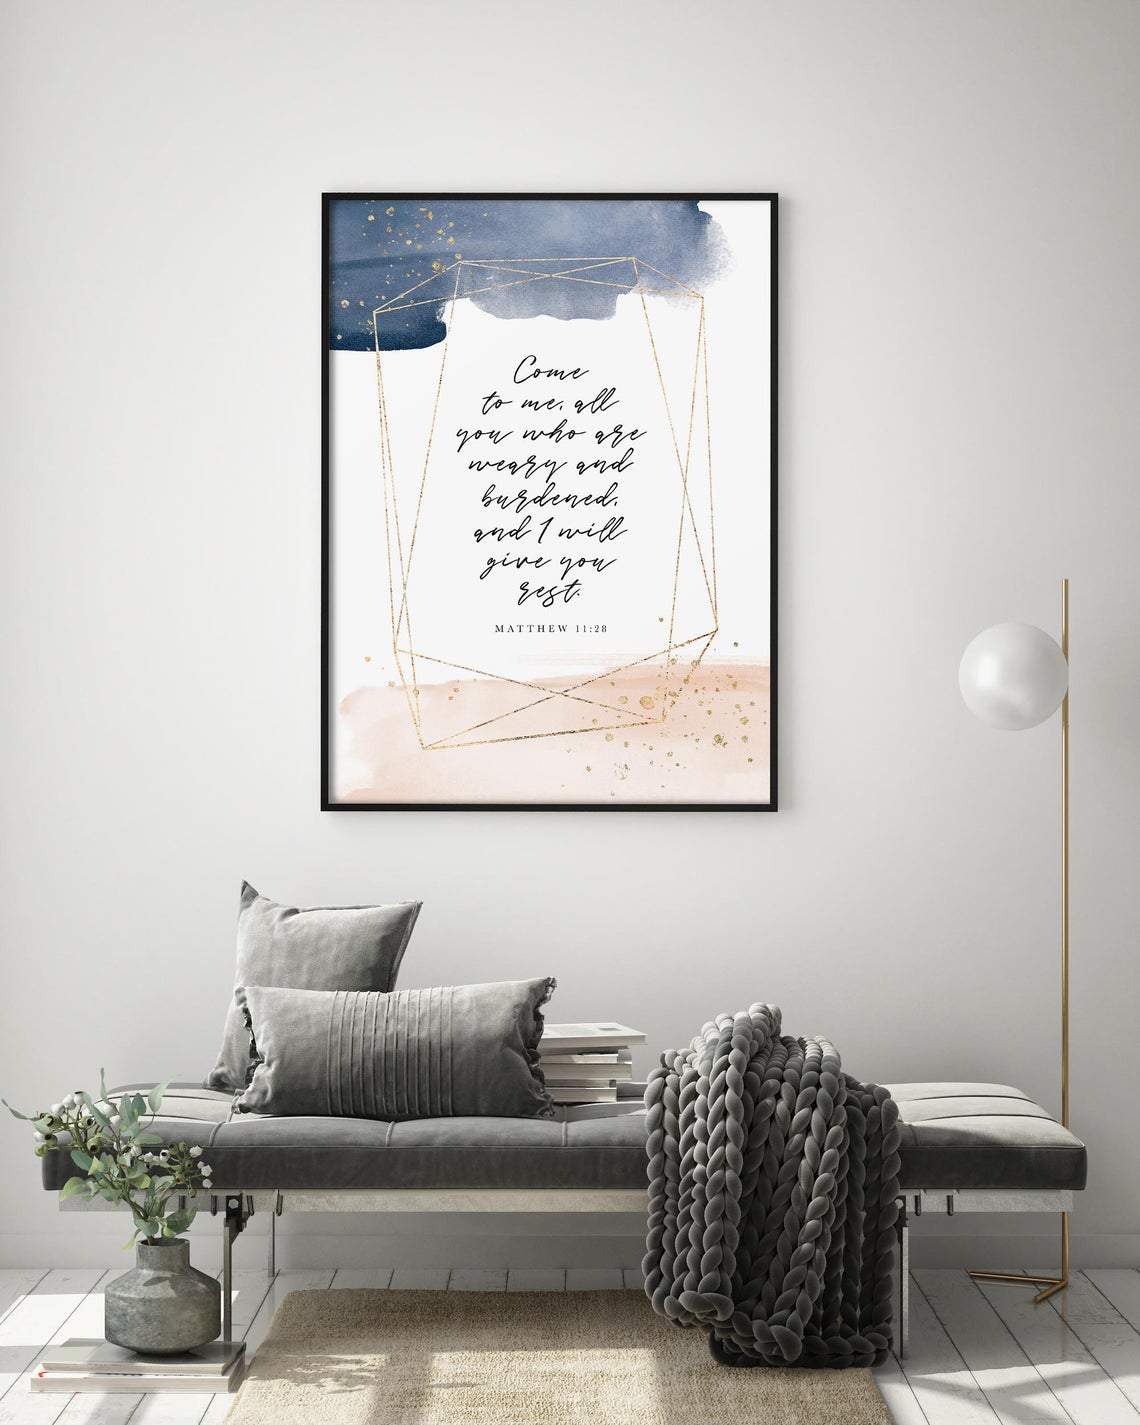 Living Words Wall Decor Come to me all who are weary